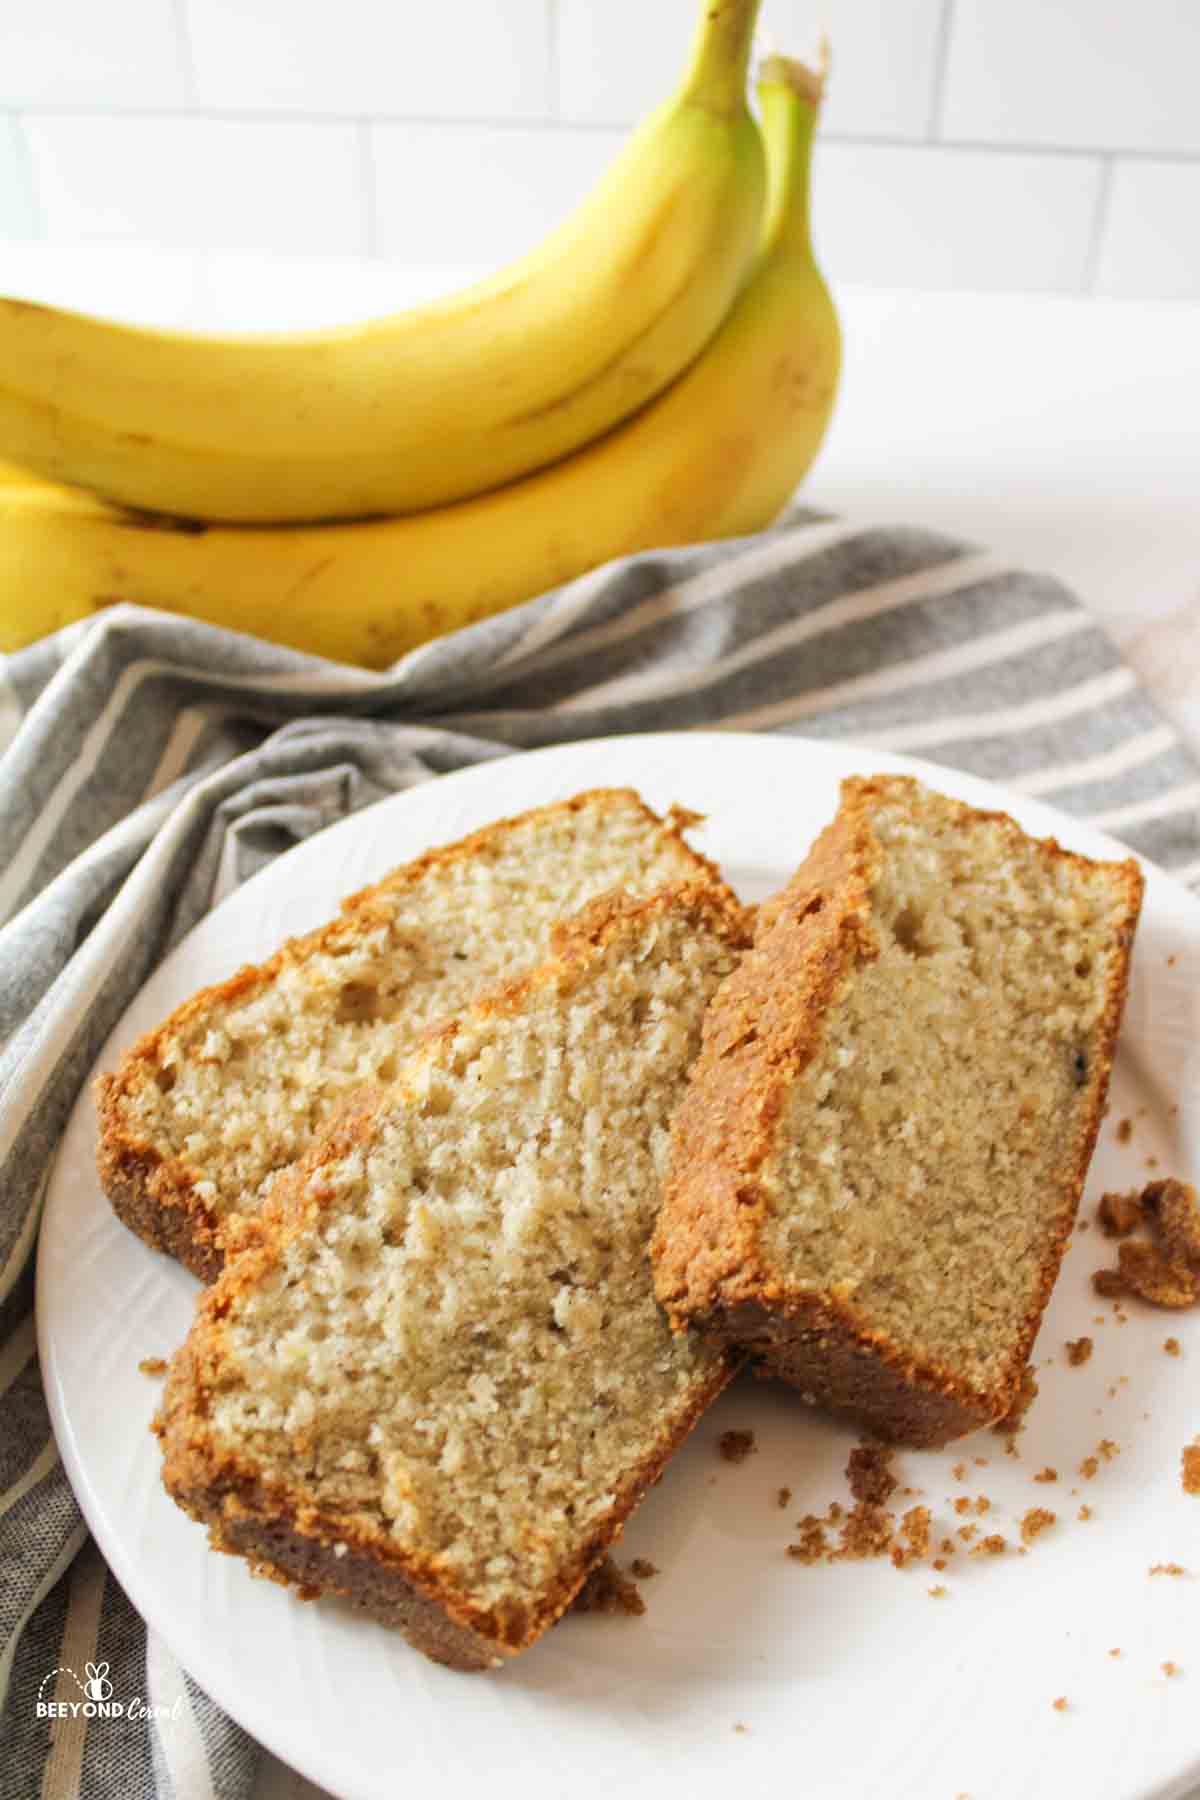 three slices of cinamon crumble banana bread on a plate next to a striped towel and fresh bananas